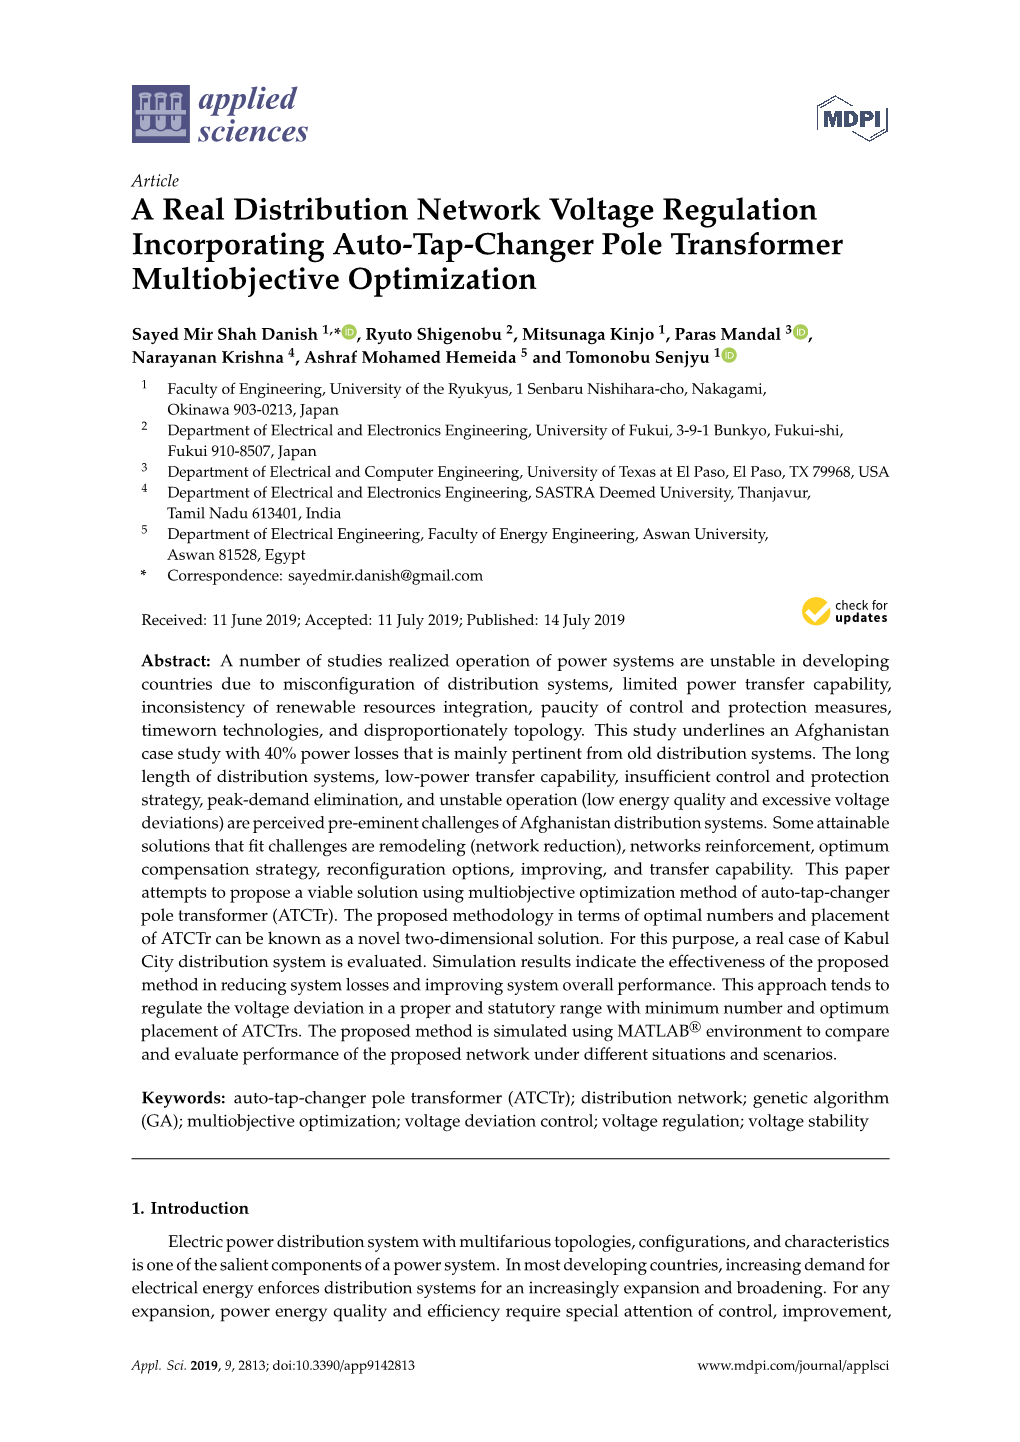 A Real Distribution Network Voltage Regulation Incorporating Auto-Tap-Changer Pole Transformer Multiobjective Optimization